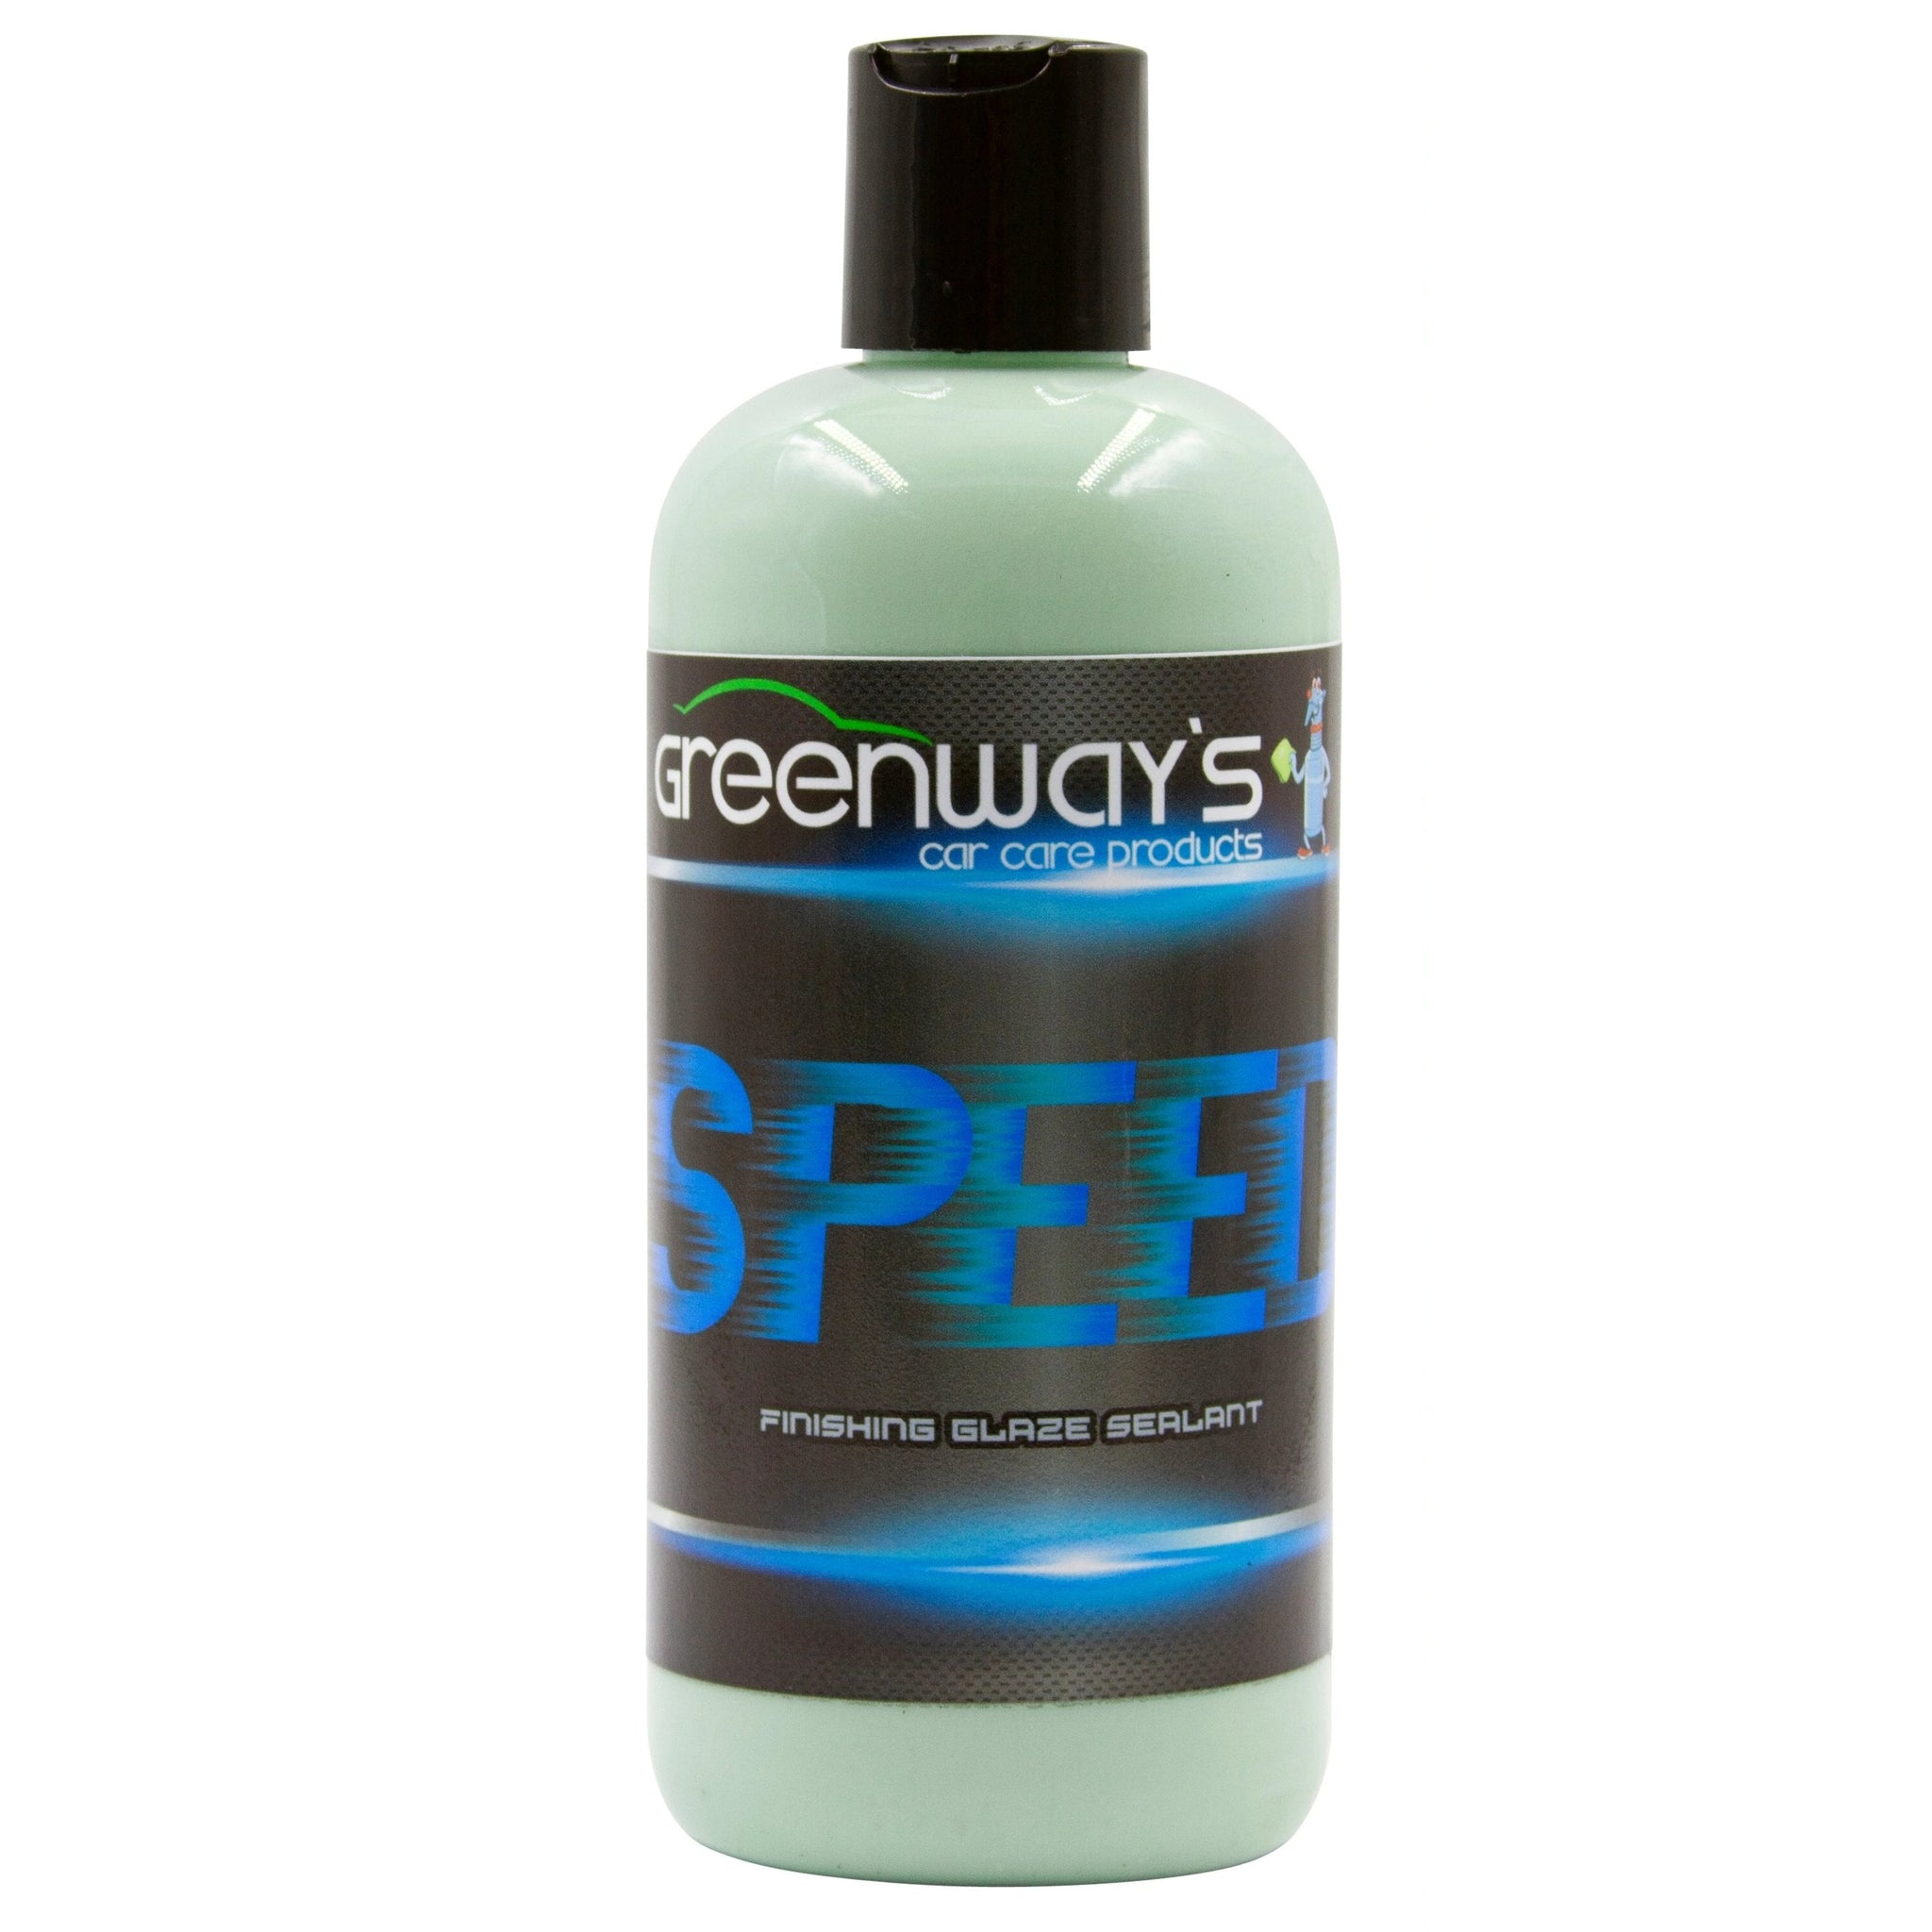 Greenway’s Speed, creamy wax-free, correction and protection finishing glaze sealant for sensitive paintwork, 16 ounces.